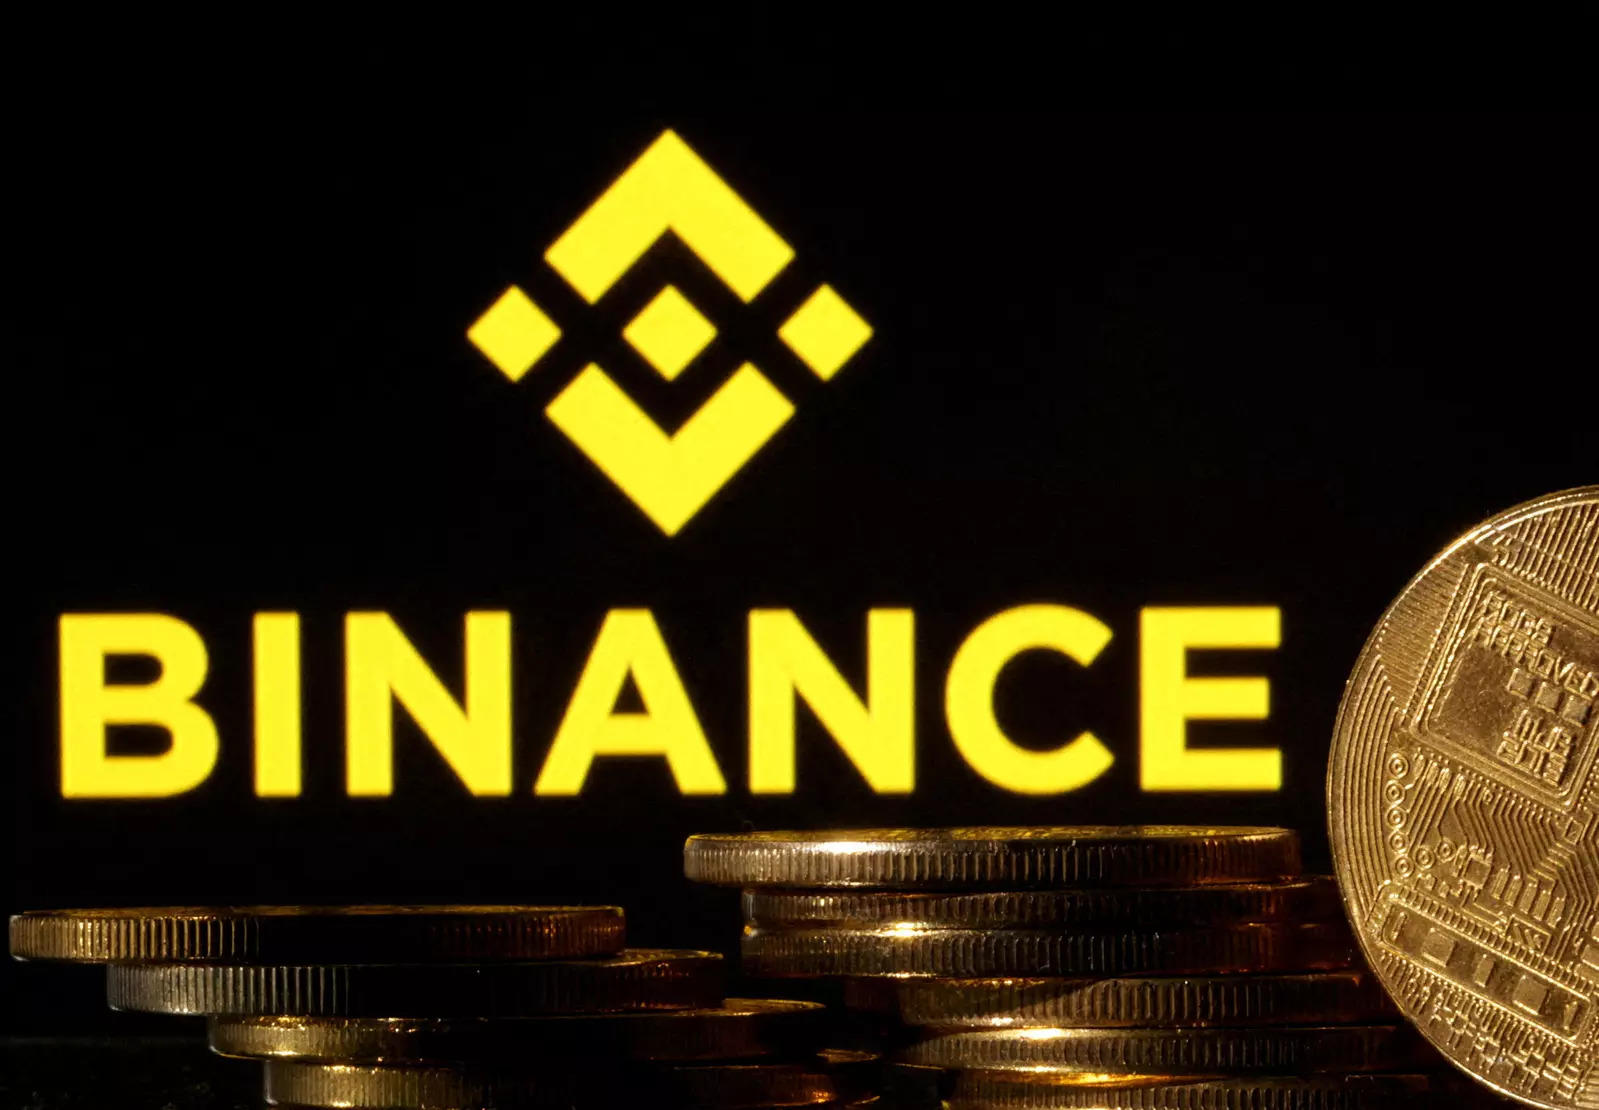 Binance executive's texts and documents reveal plan to avoid US regulatory scrutiny